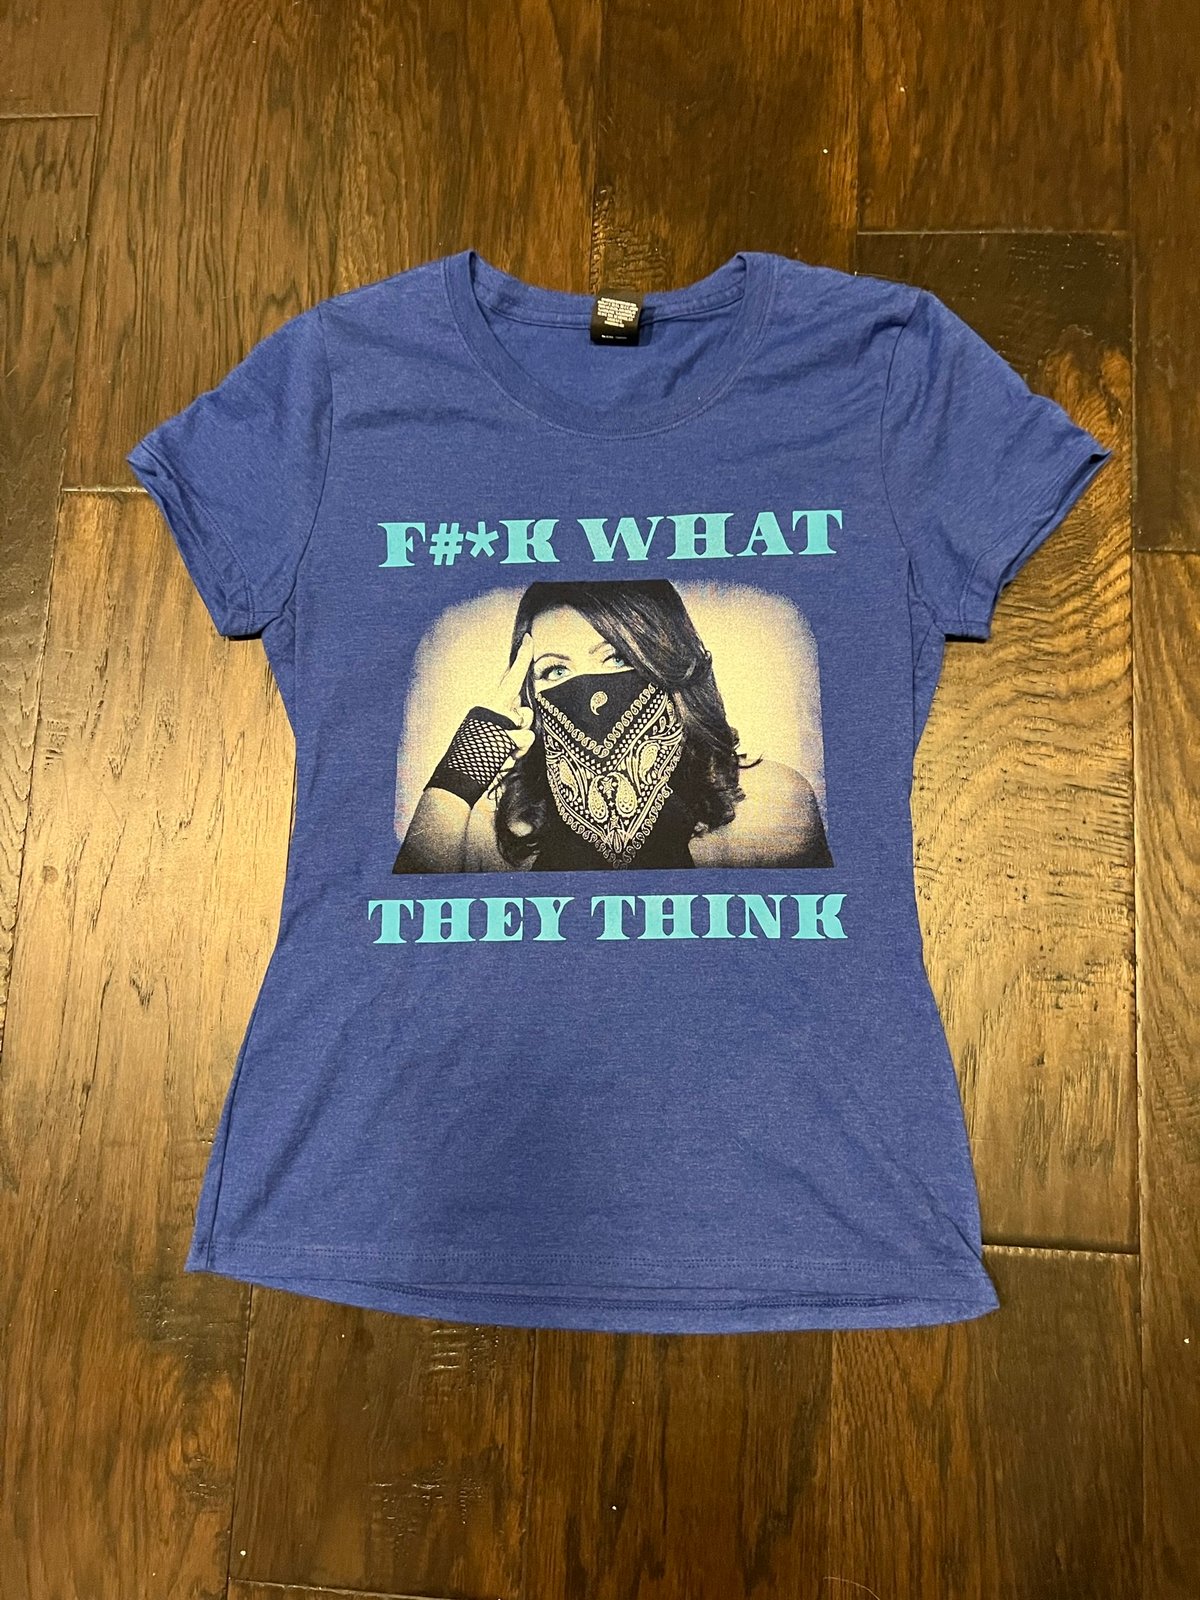 "F#*K WHAT THEY THINK" UNISEX TSHIRT/TANK TOP